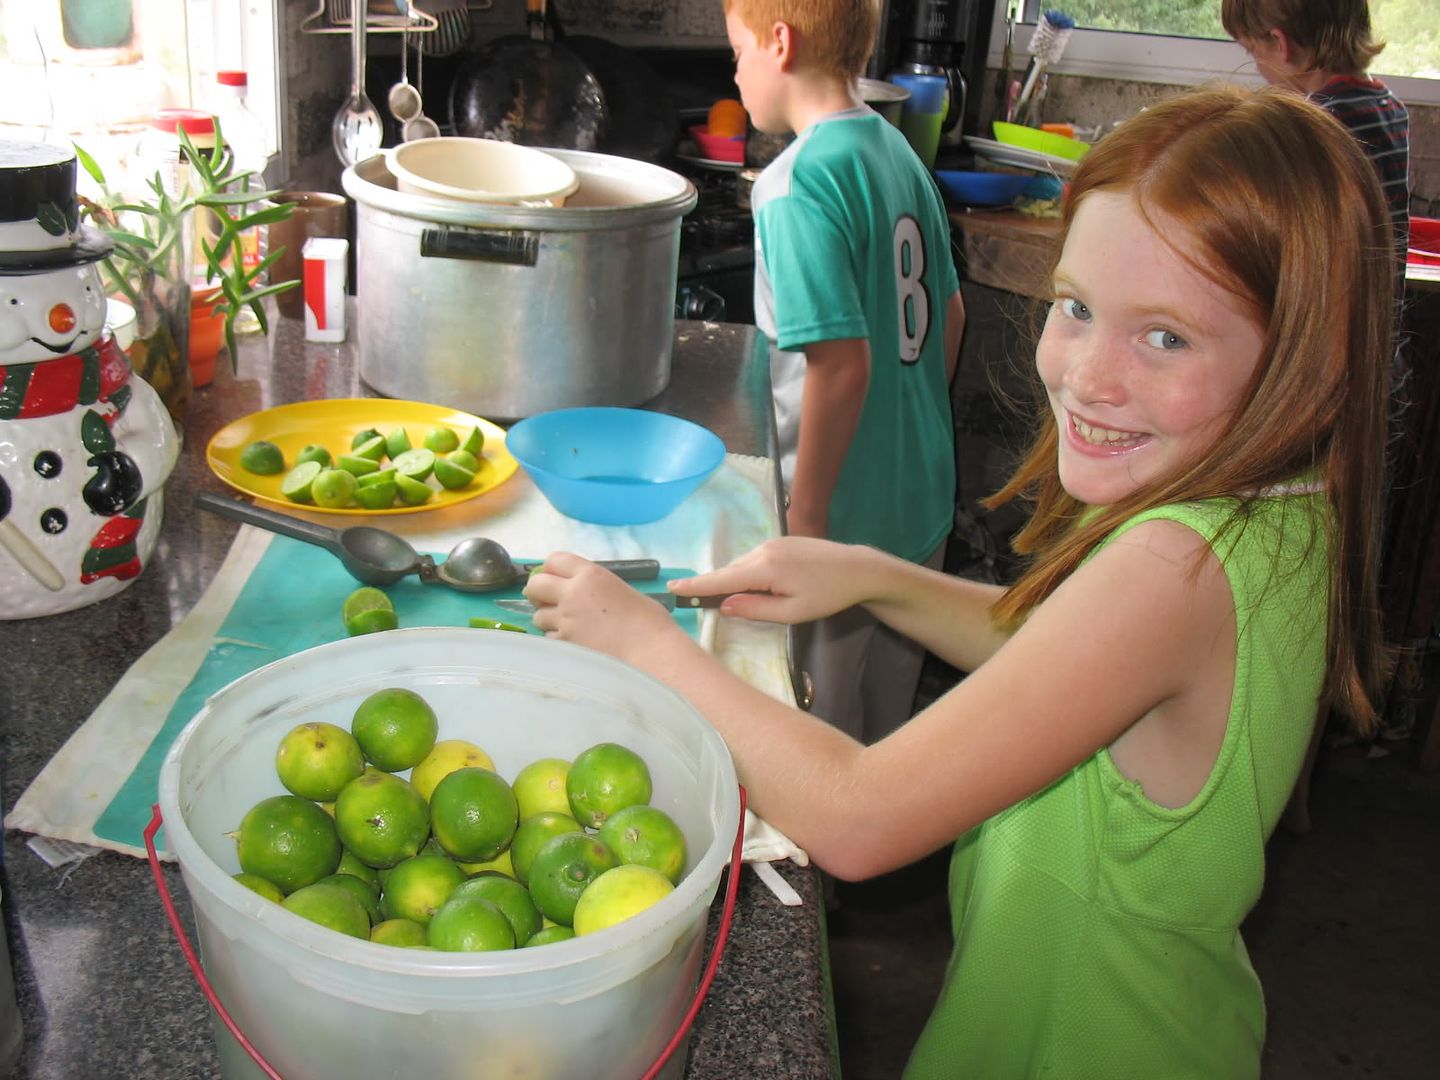 Evie squeezing limes